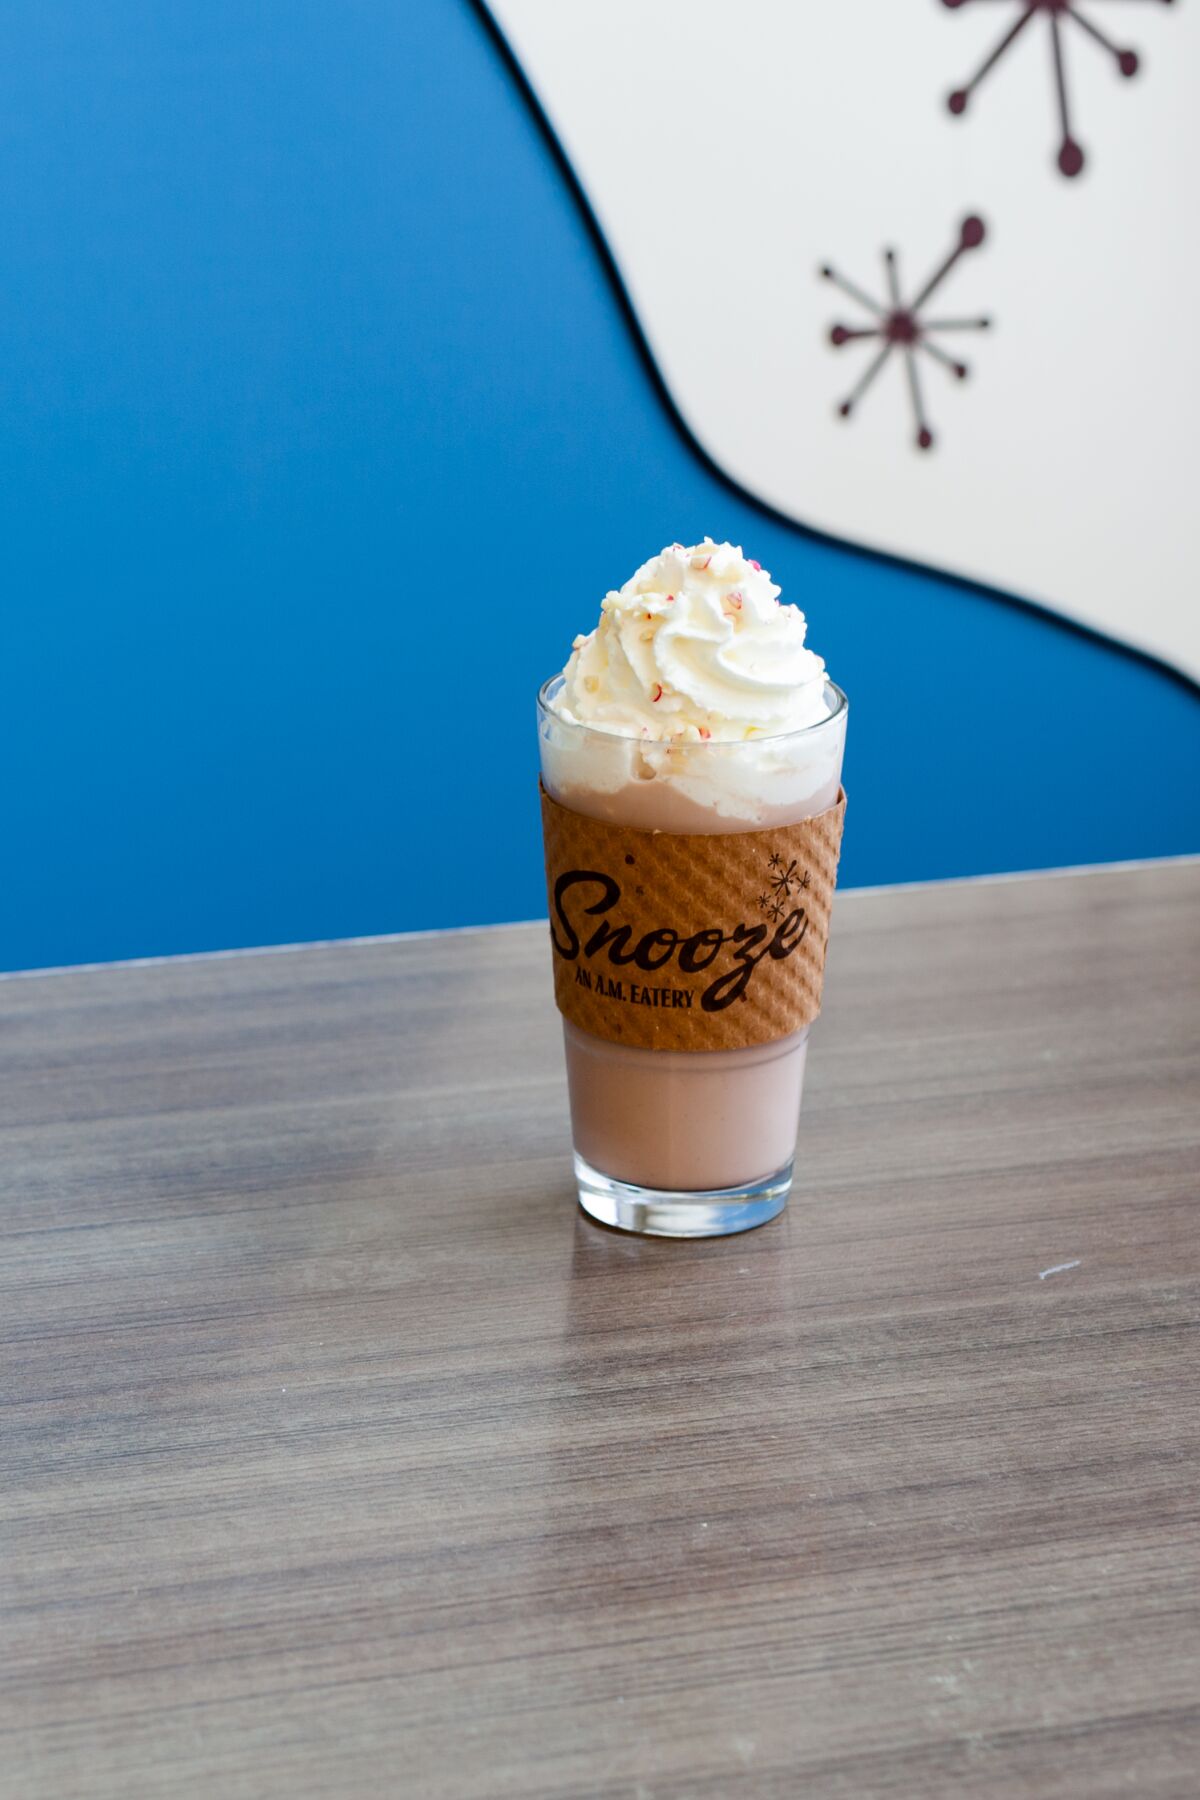 The Spiked Cocoa from Snooze, an A.M. Eatery.